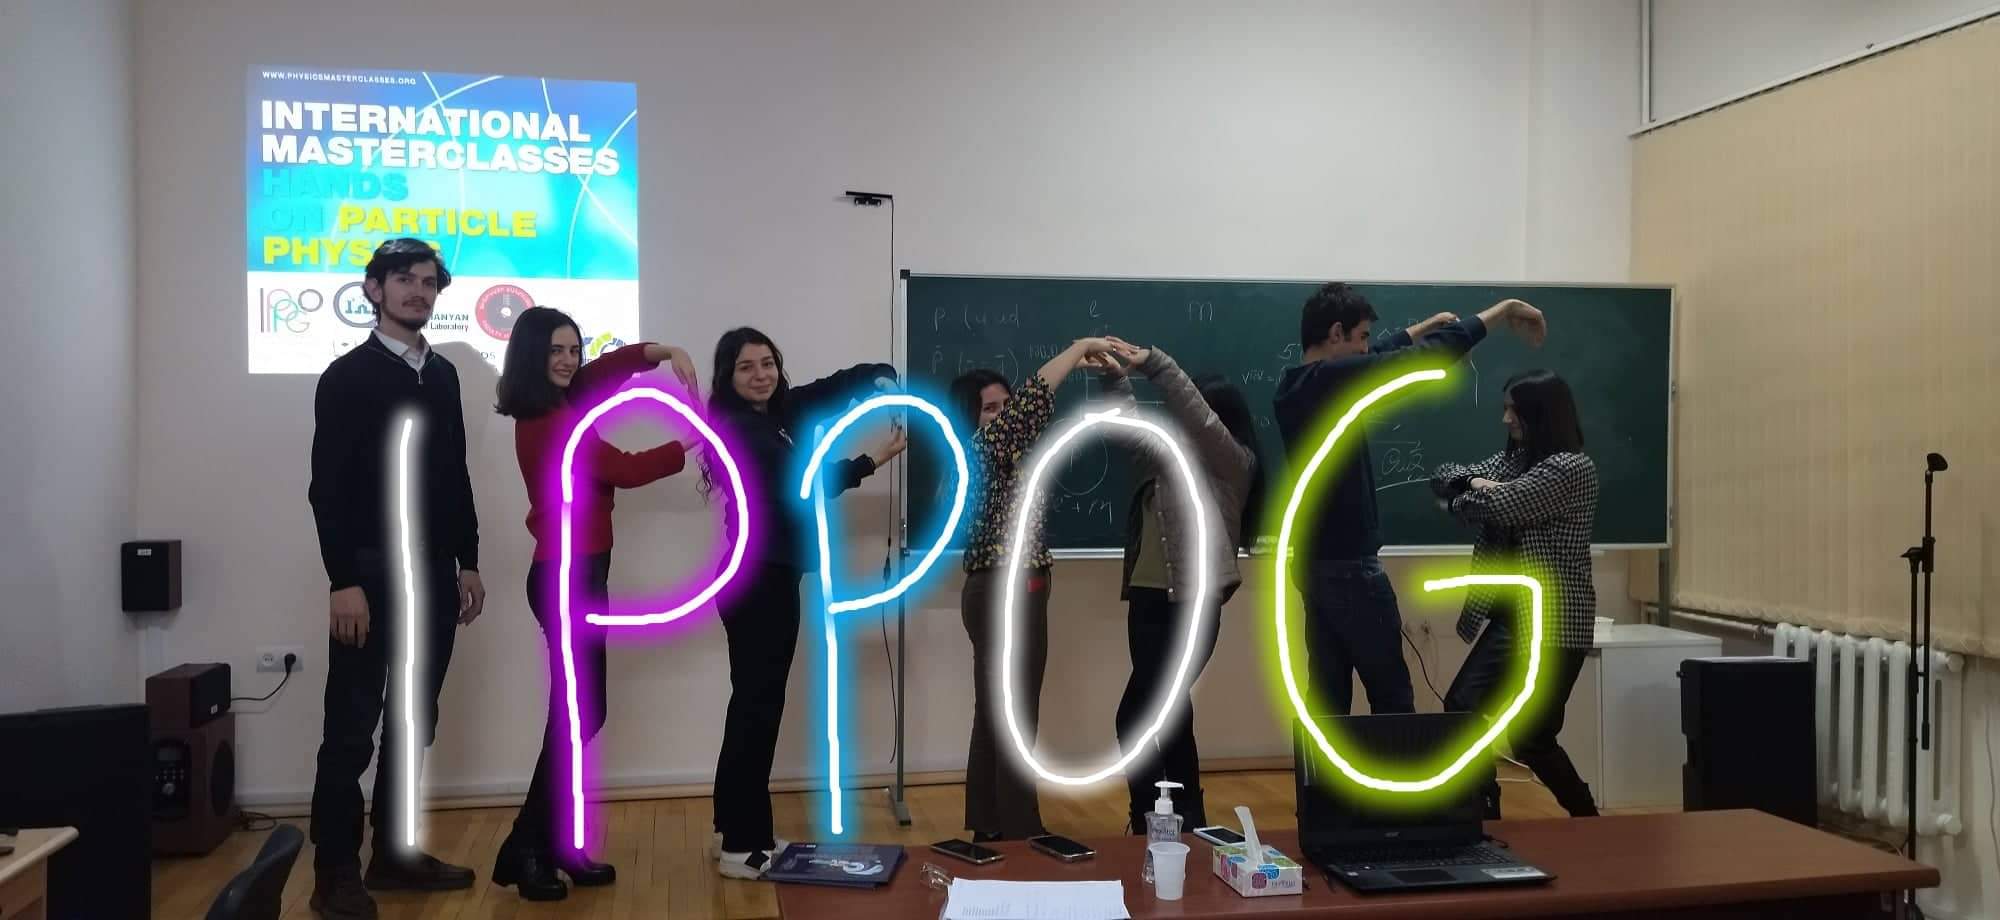 Enthusiastic students from Armenia express their appreciation for IPPOG. We assure you the feeling is mutual.